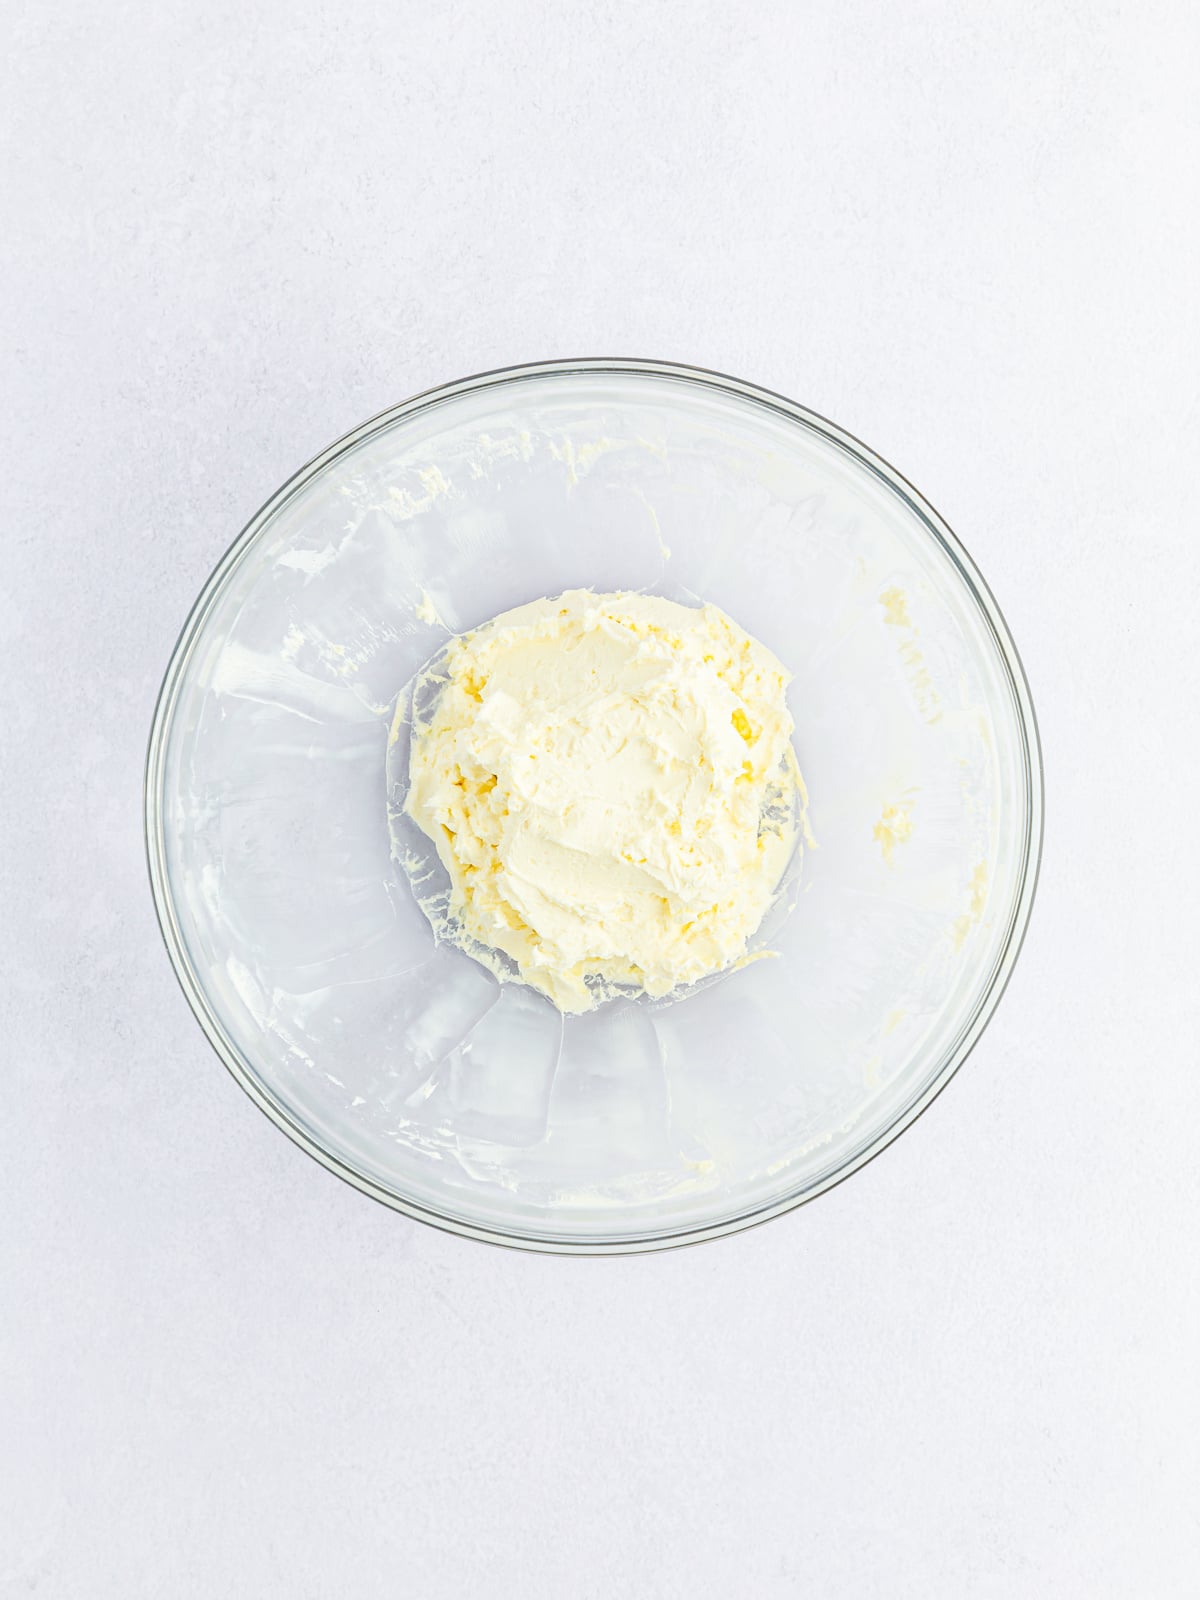 cream cheese in a large bowl.